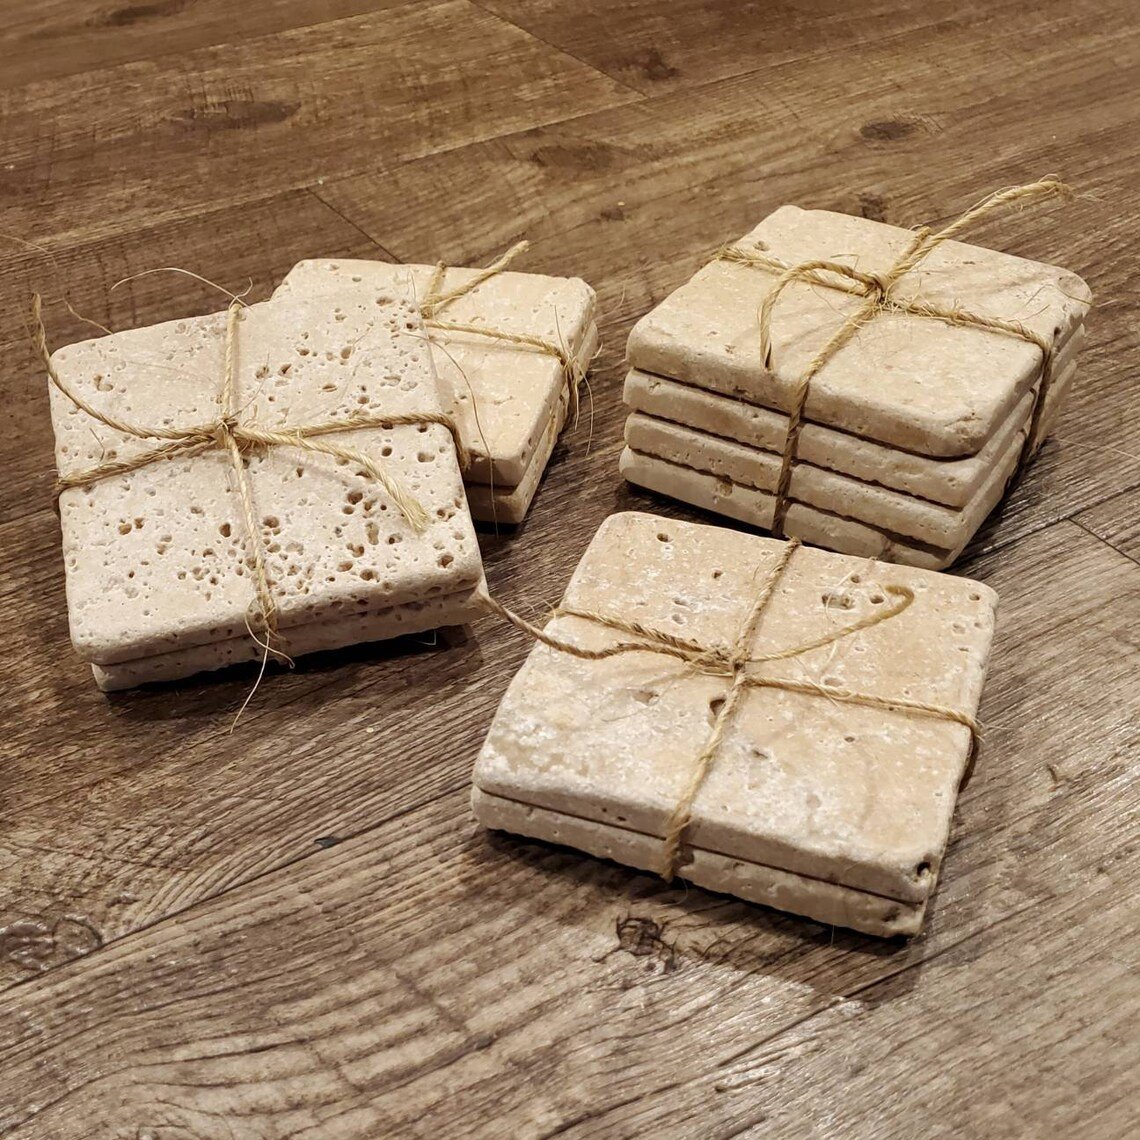 travertine-stone-coasters-natural-stone-coaster-set-rustic-handcrafted-stone-drink-coasters-decorative-tabletop-accessories-stone-beverage-coasters